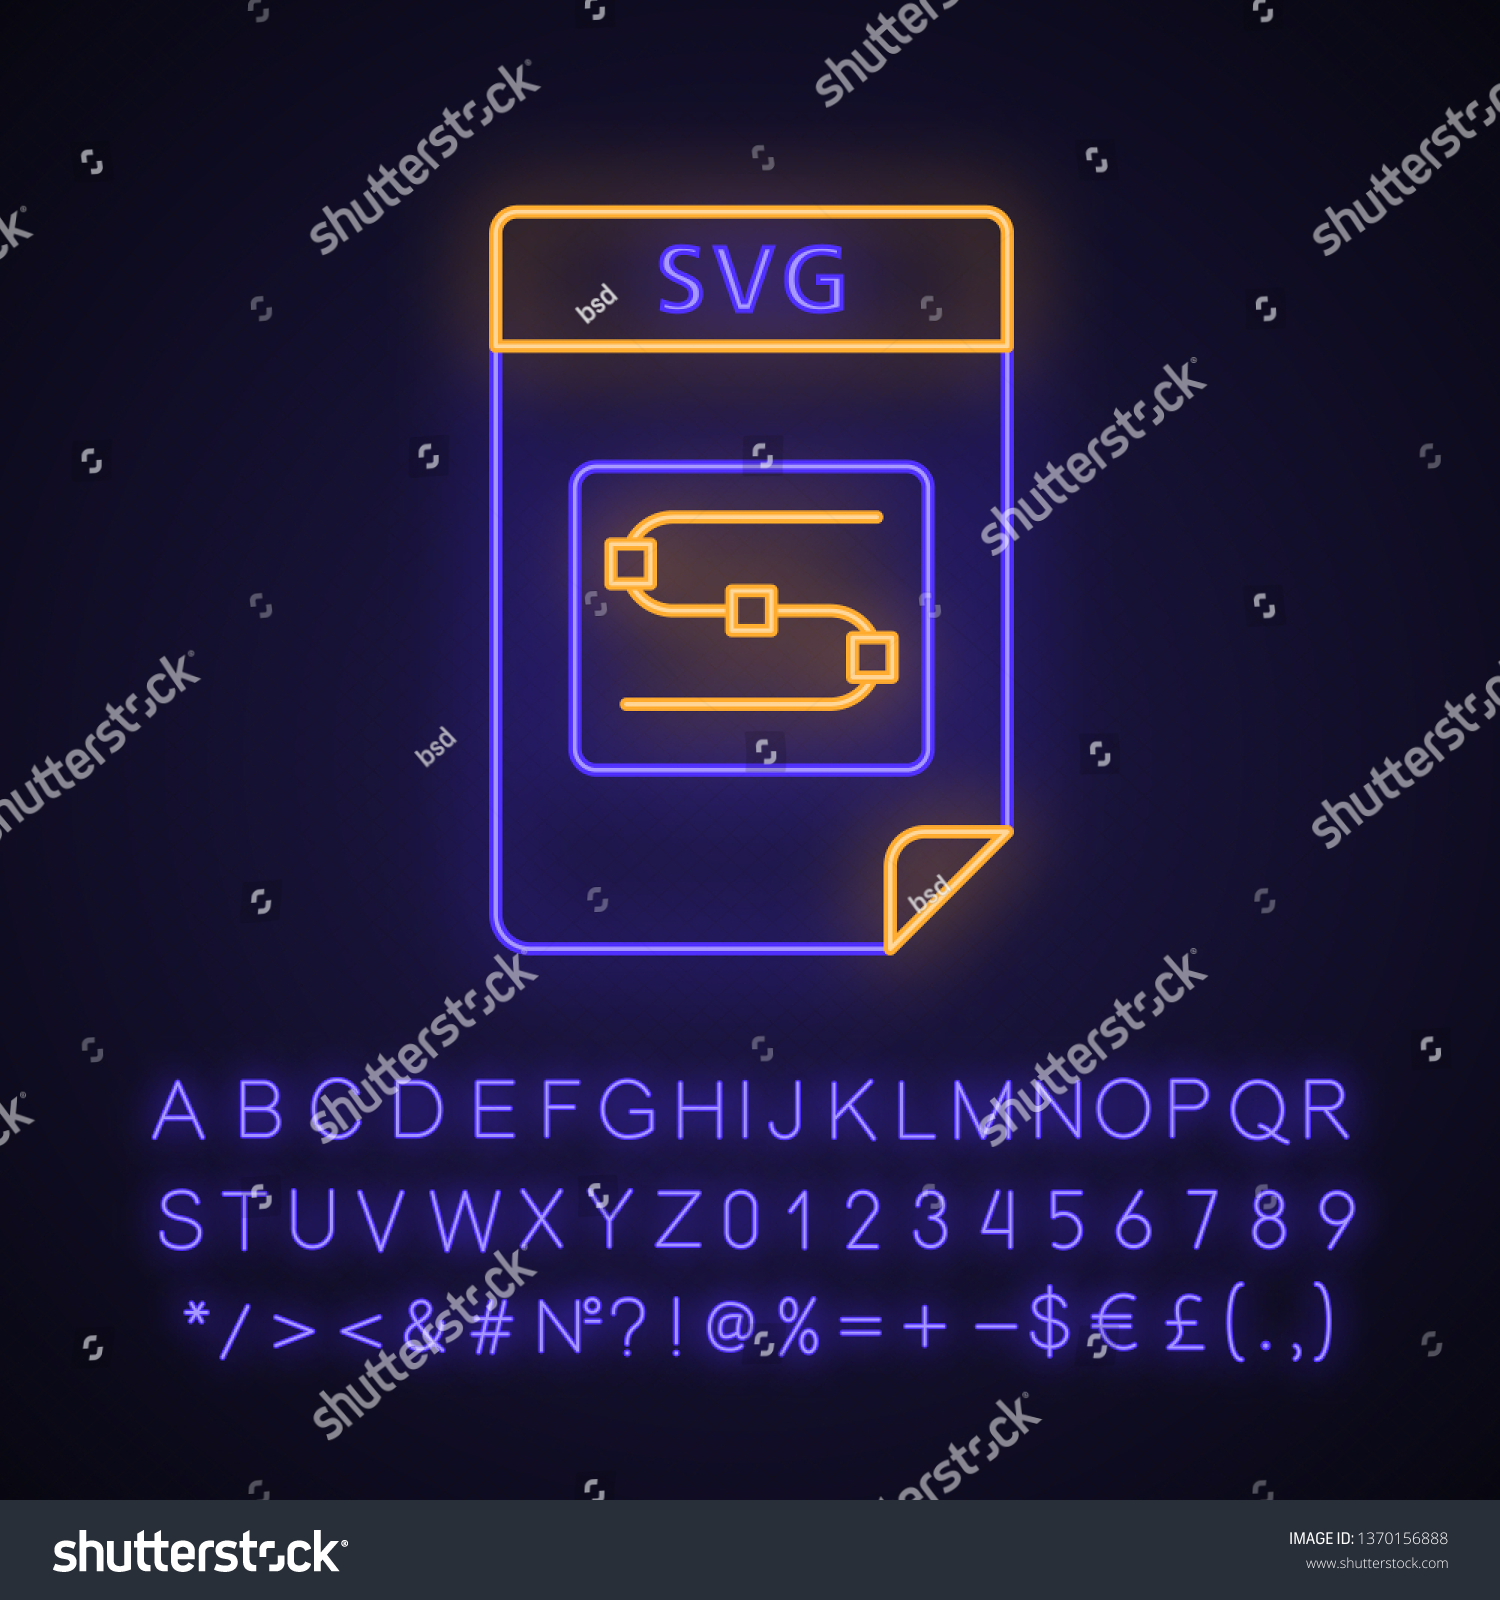 SVG of SVG file neon light icon. Scalable vector graphics. Image file format. Glowing sign with alphabet, numbers and symbols. Vector isolated illustration svg